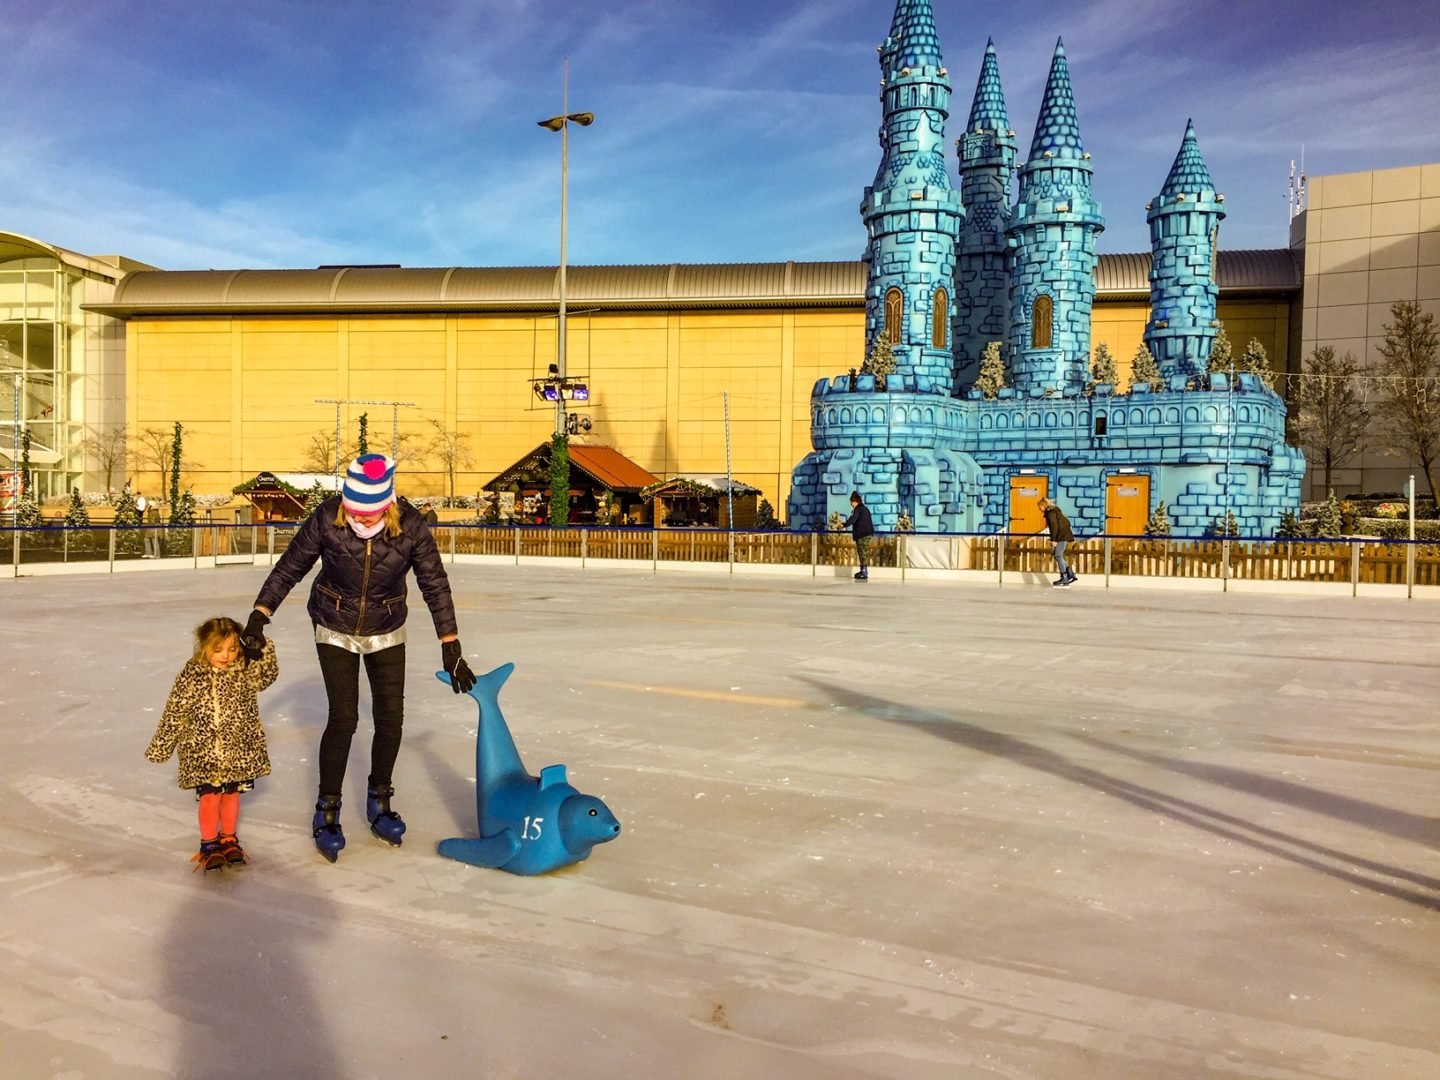 Just off the motorway - The Mall at Cribbs Causeway_ice rink_enchanted castle